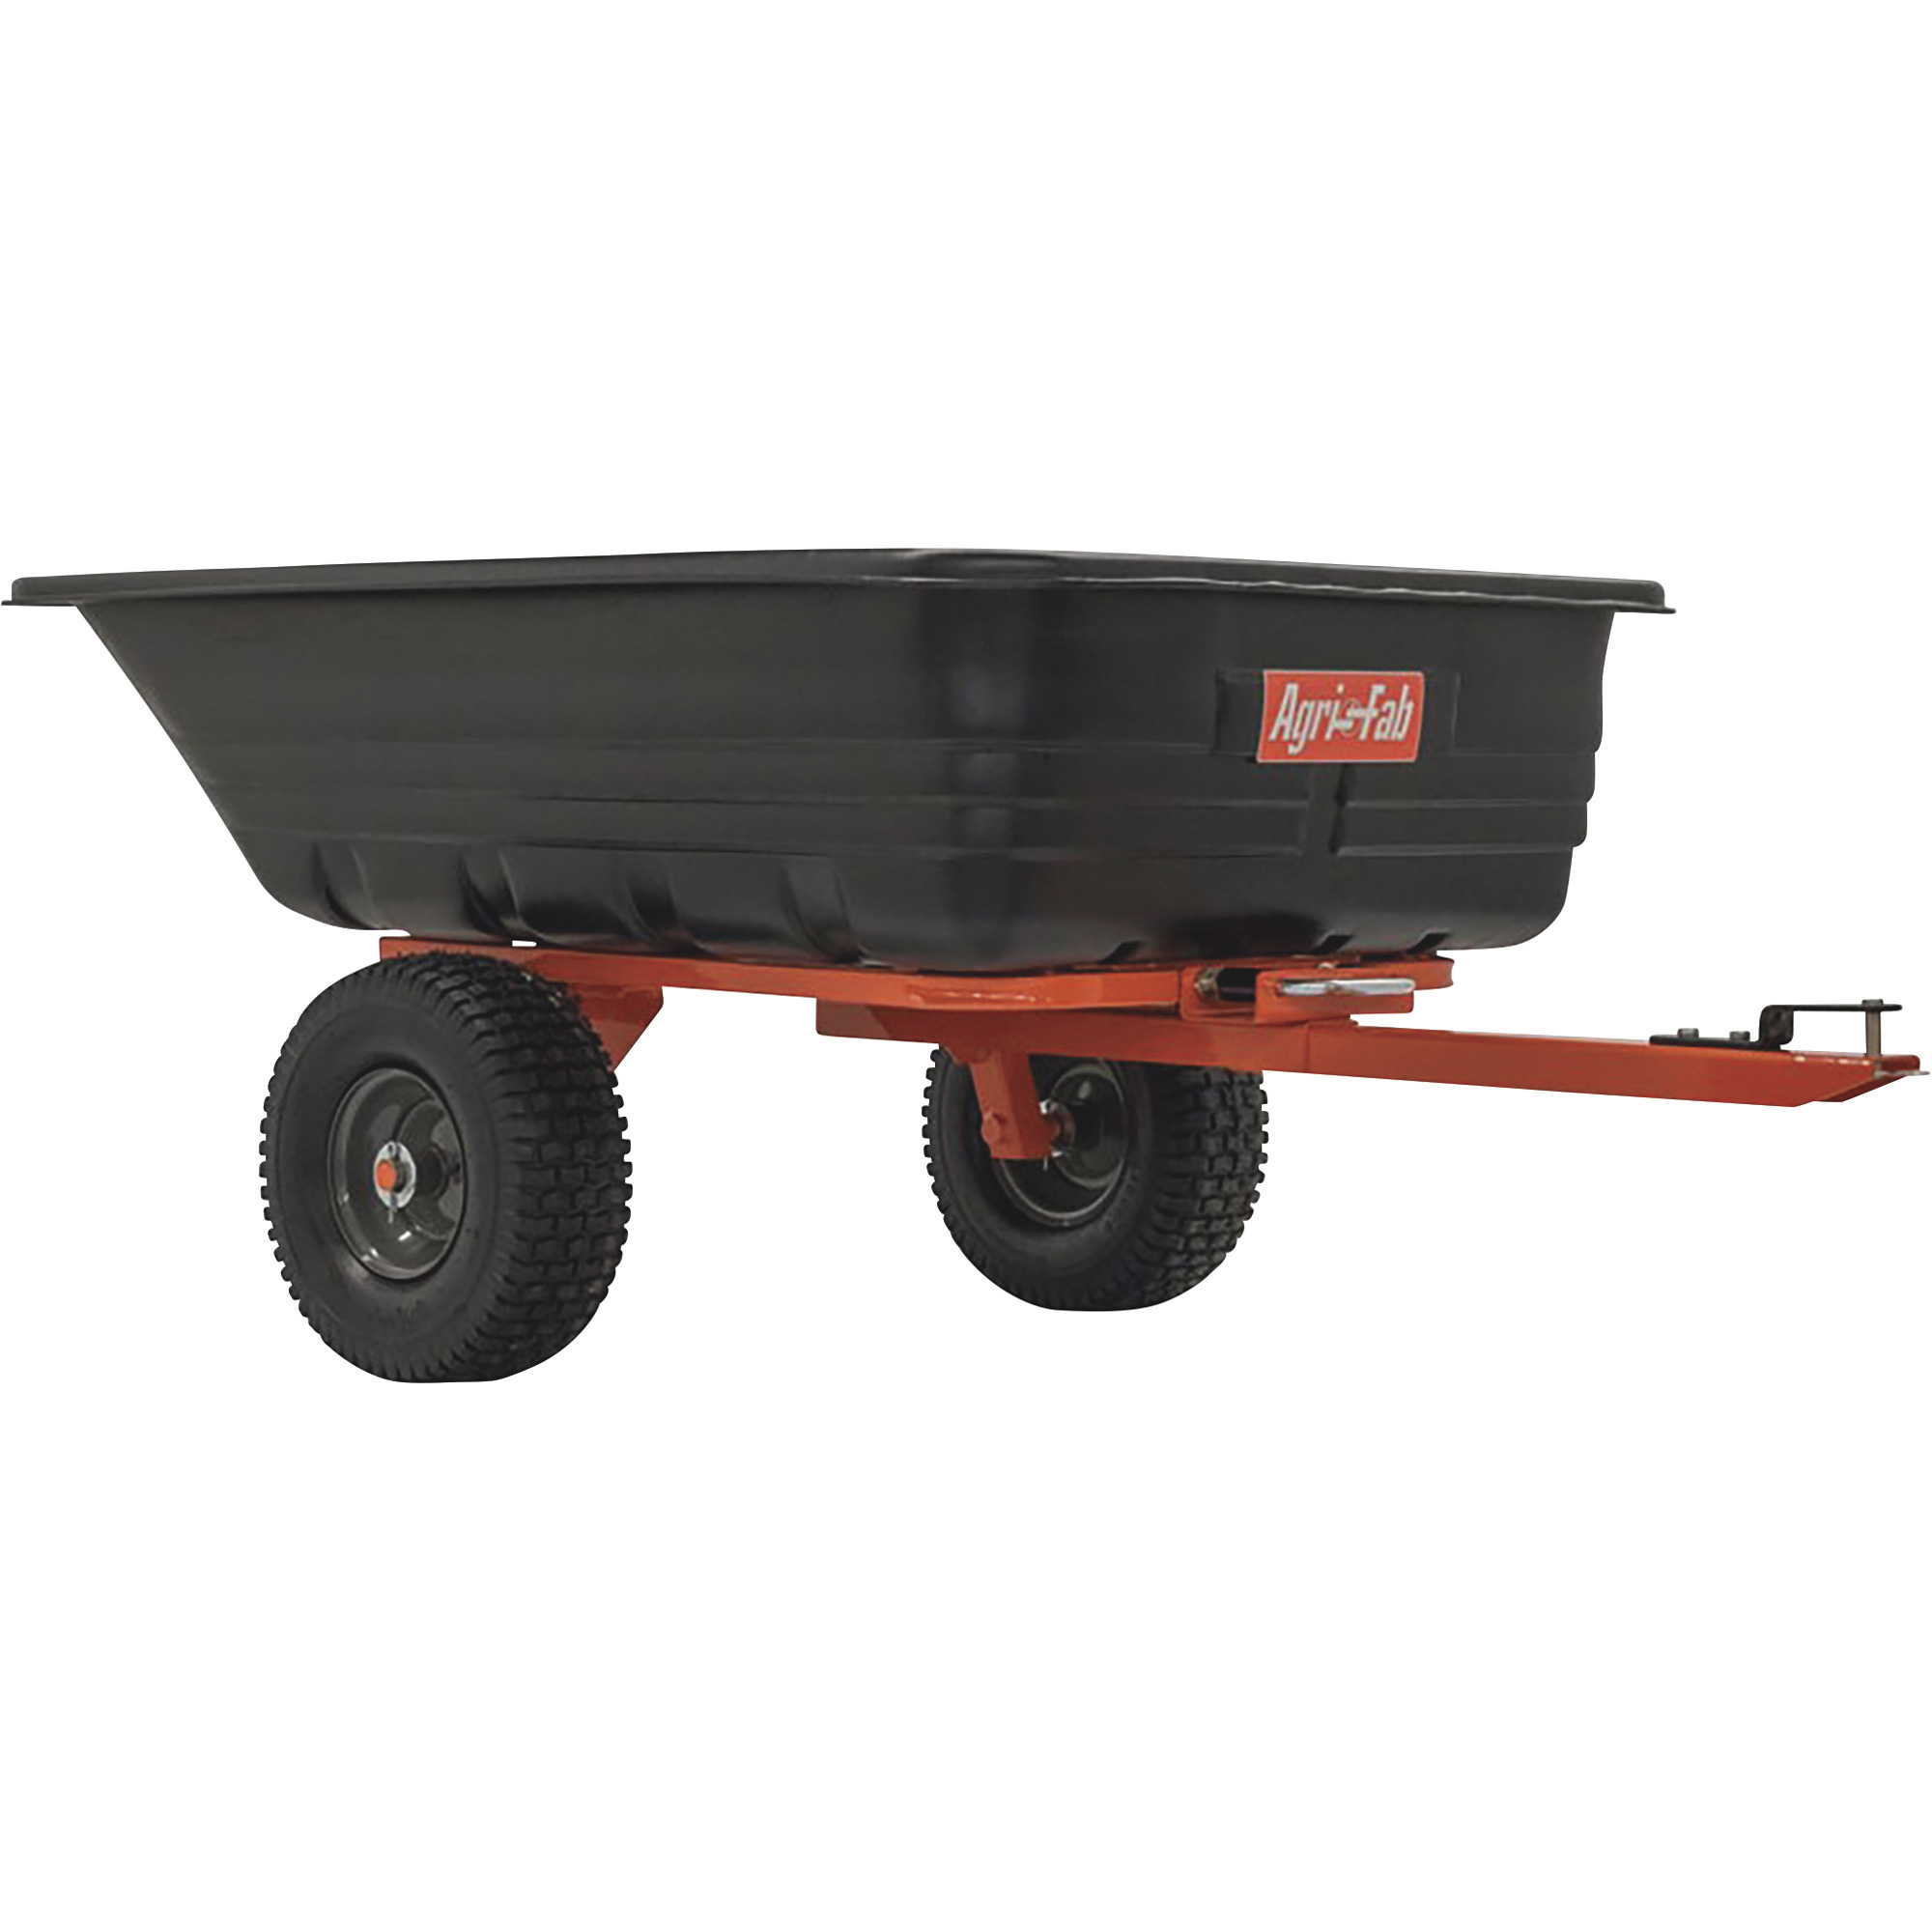 Agri-Fab 12 Cu. Ft. Swivel Bed Towable Poly Utility Cart, 700-Lb. Capacity, 73Inch L x 37Inch W x 27 1/2Inch H, Model 45-0552